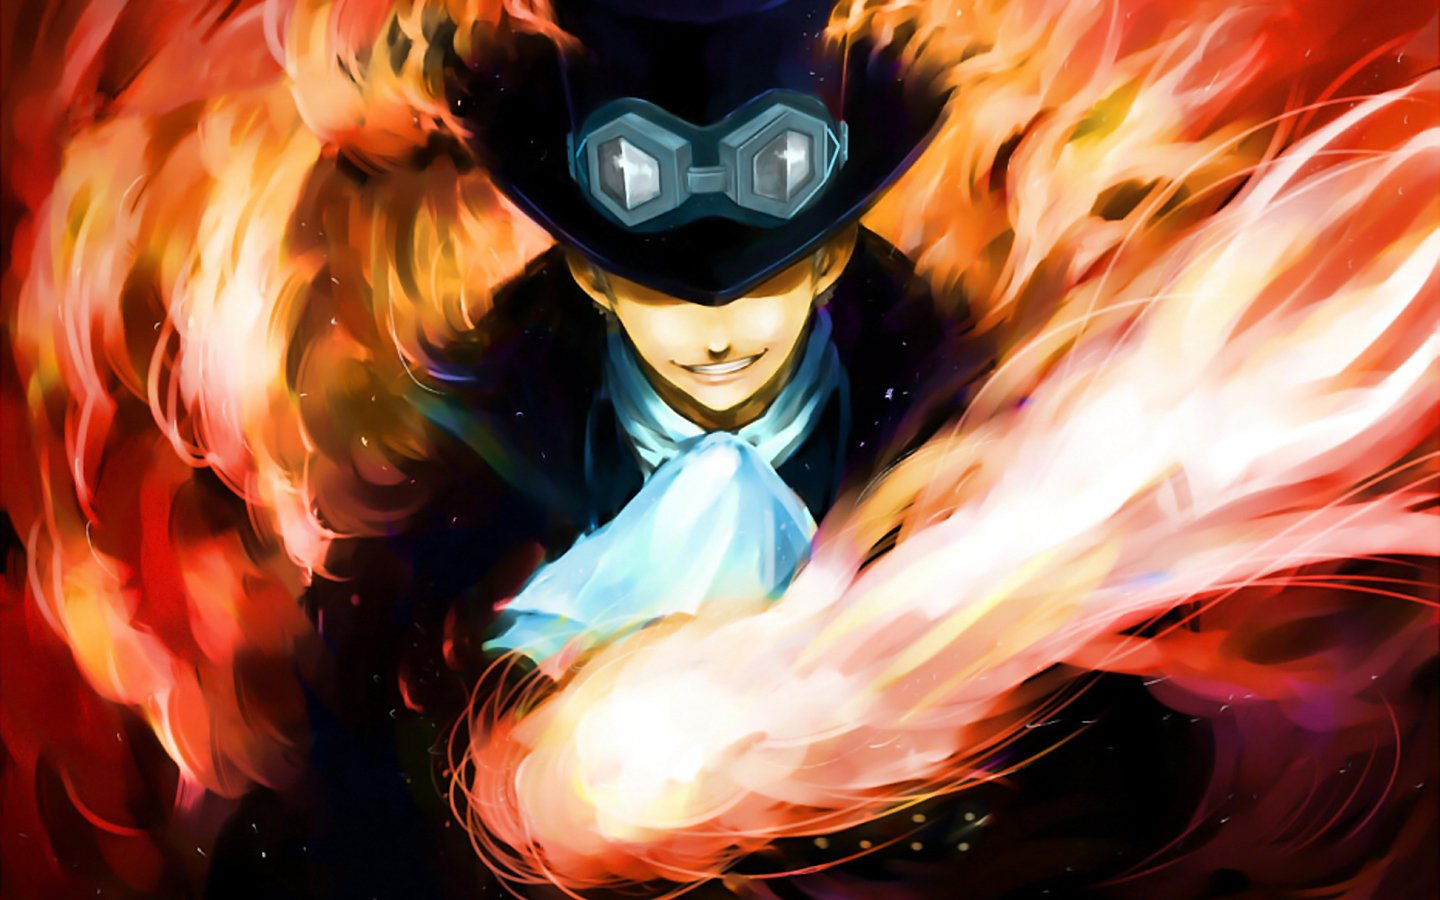 Sabo Wallpaper and Background Image | 1440x900 | ID:606666 - Wallpaper